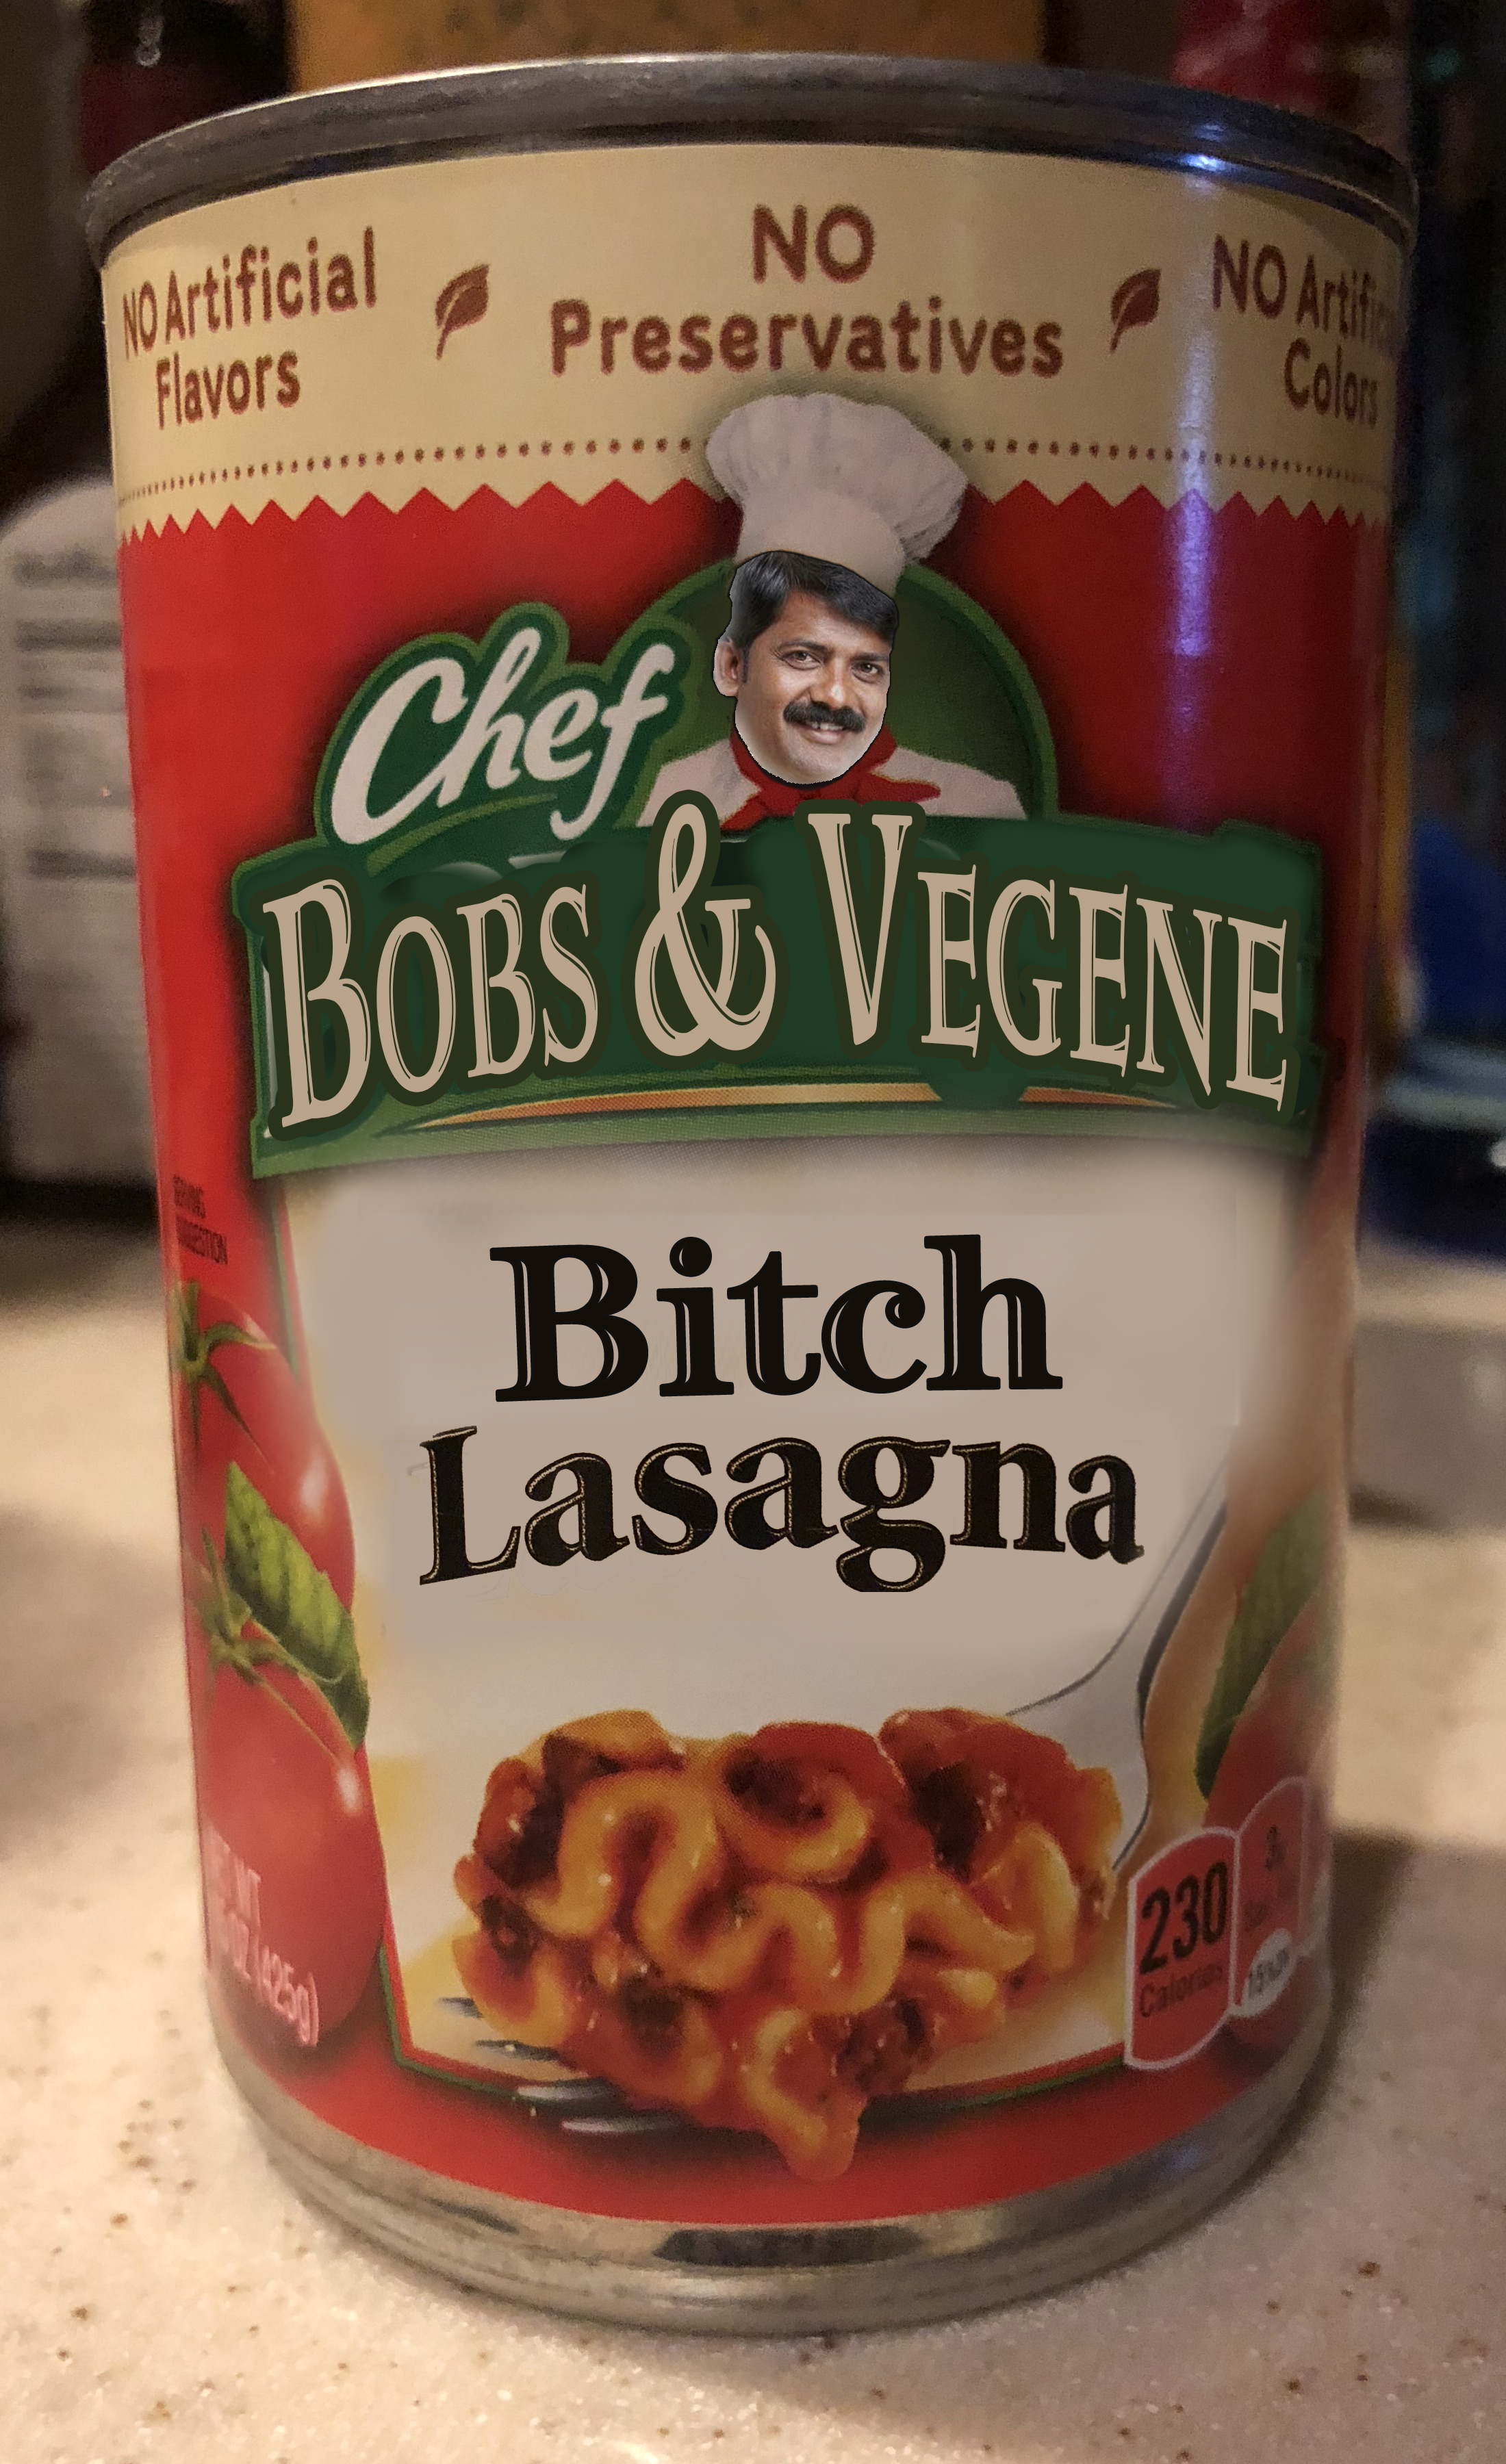 Paying homage to the bitch lasagna